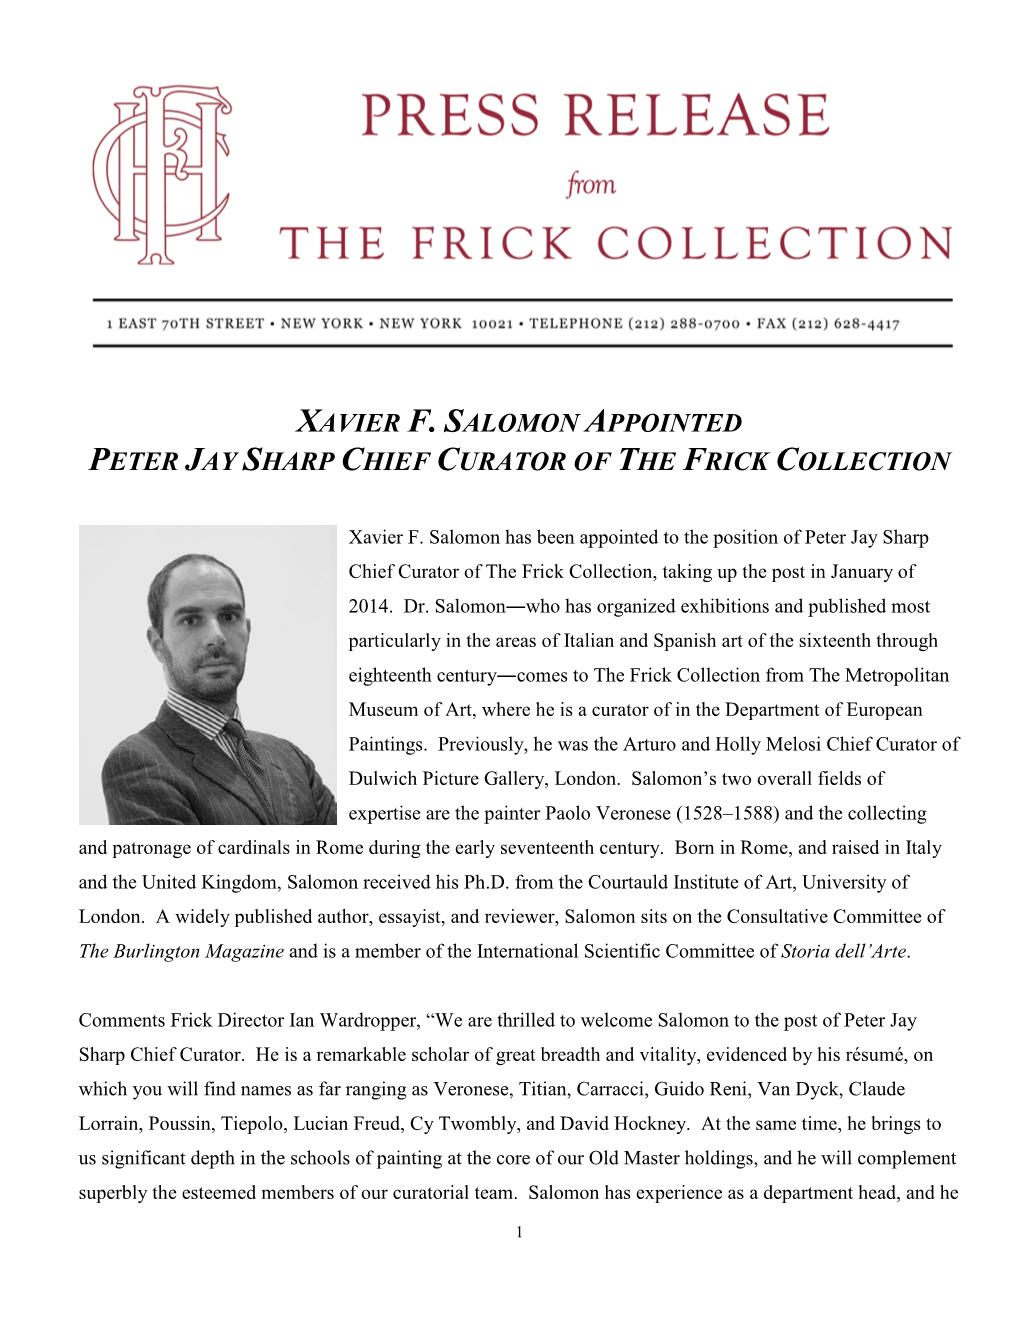 Xavier F. Salomon Appointed Peter Jay Sharp Chief Curator of the Frick Collection